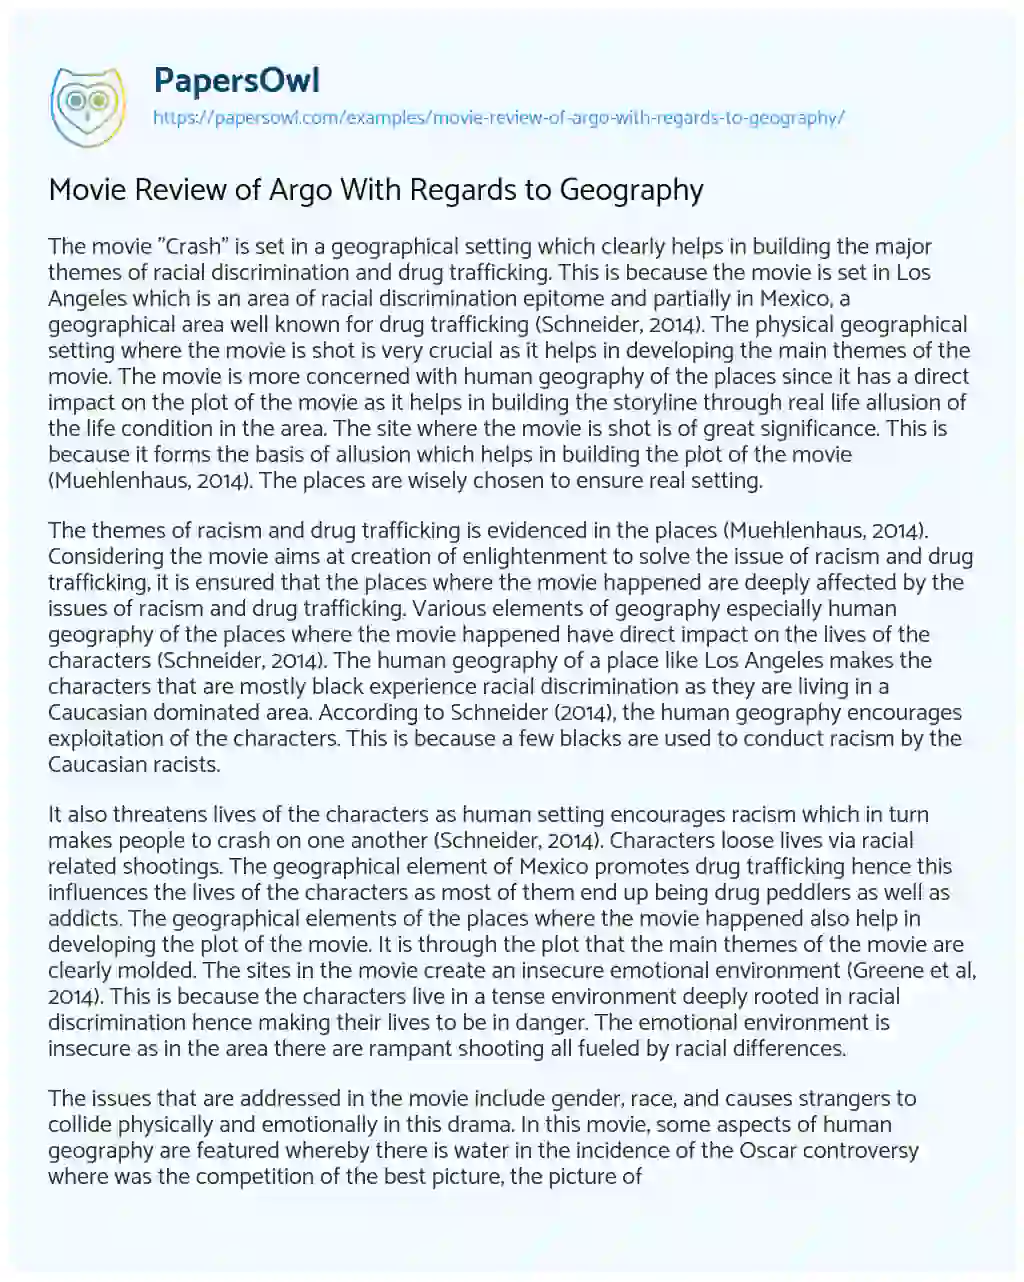 Essay on Movie Review of Argo with Regards to Geography